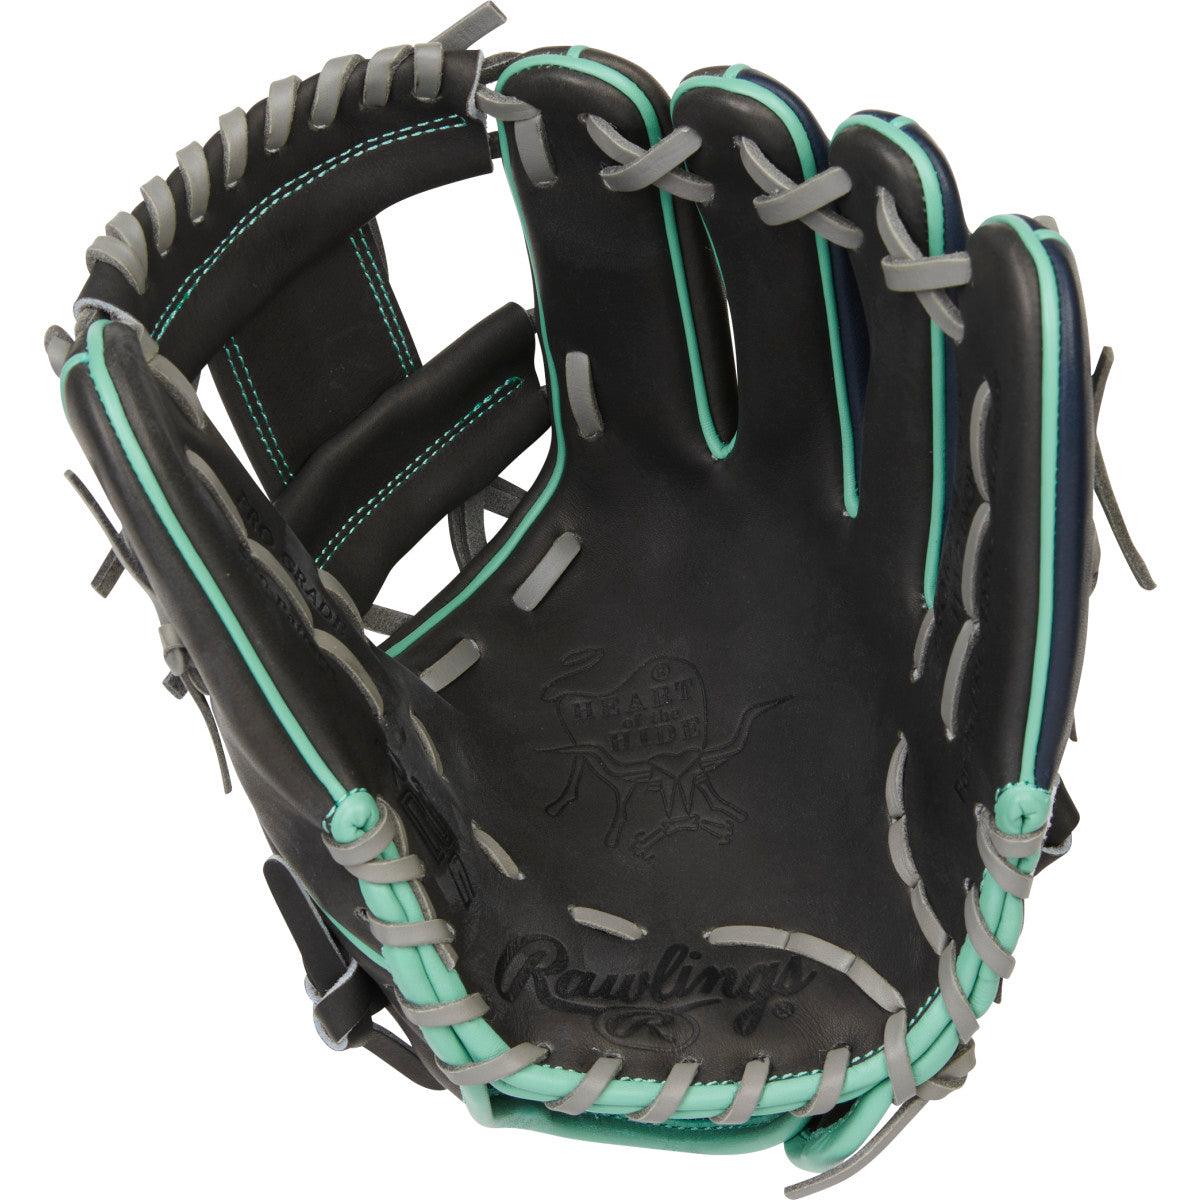 2022 Rawlings Heart of the Hide 11.5